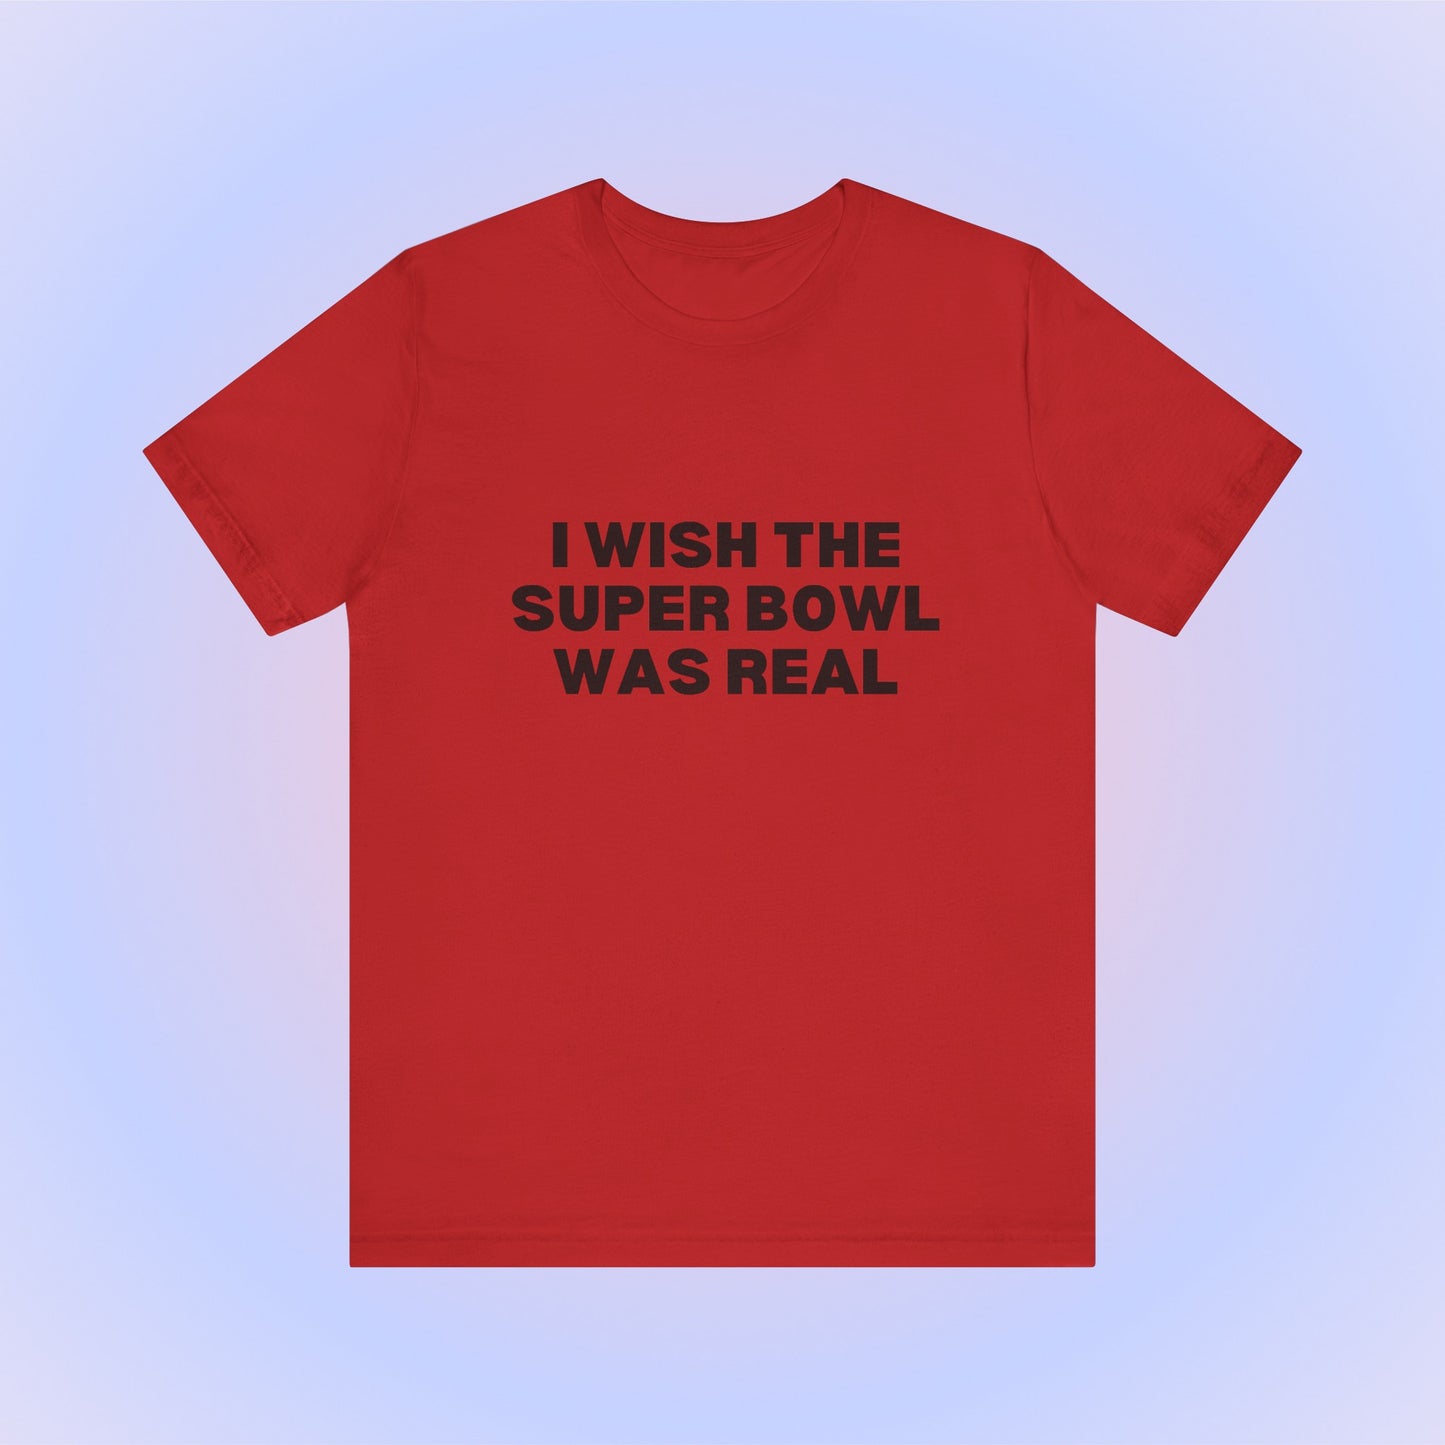 I Wish The Super Bowl Was Real, Soft Unisex T-Shirt